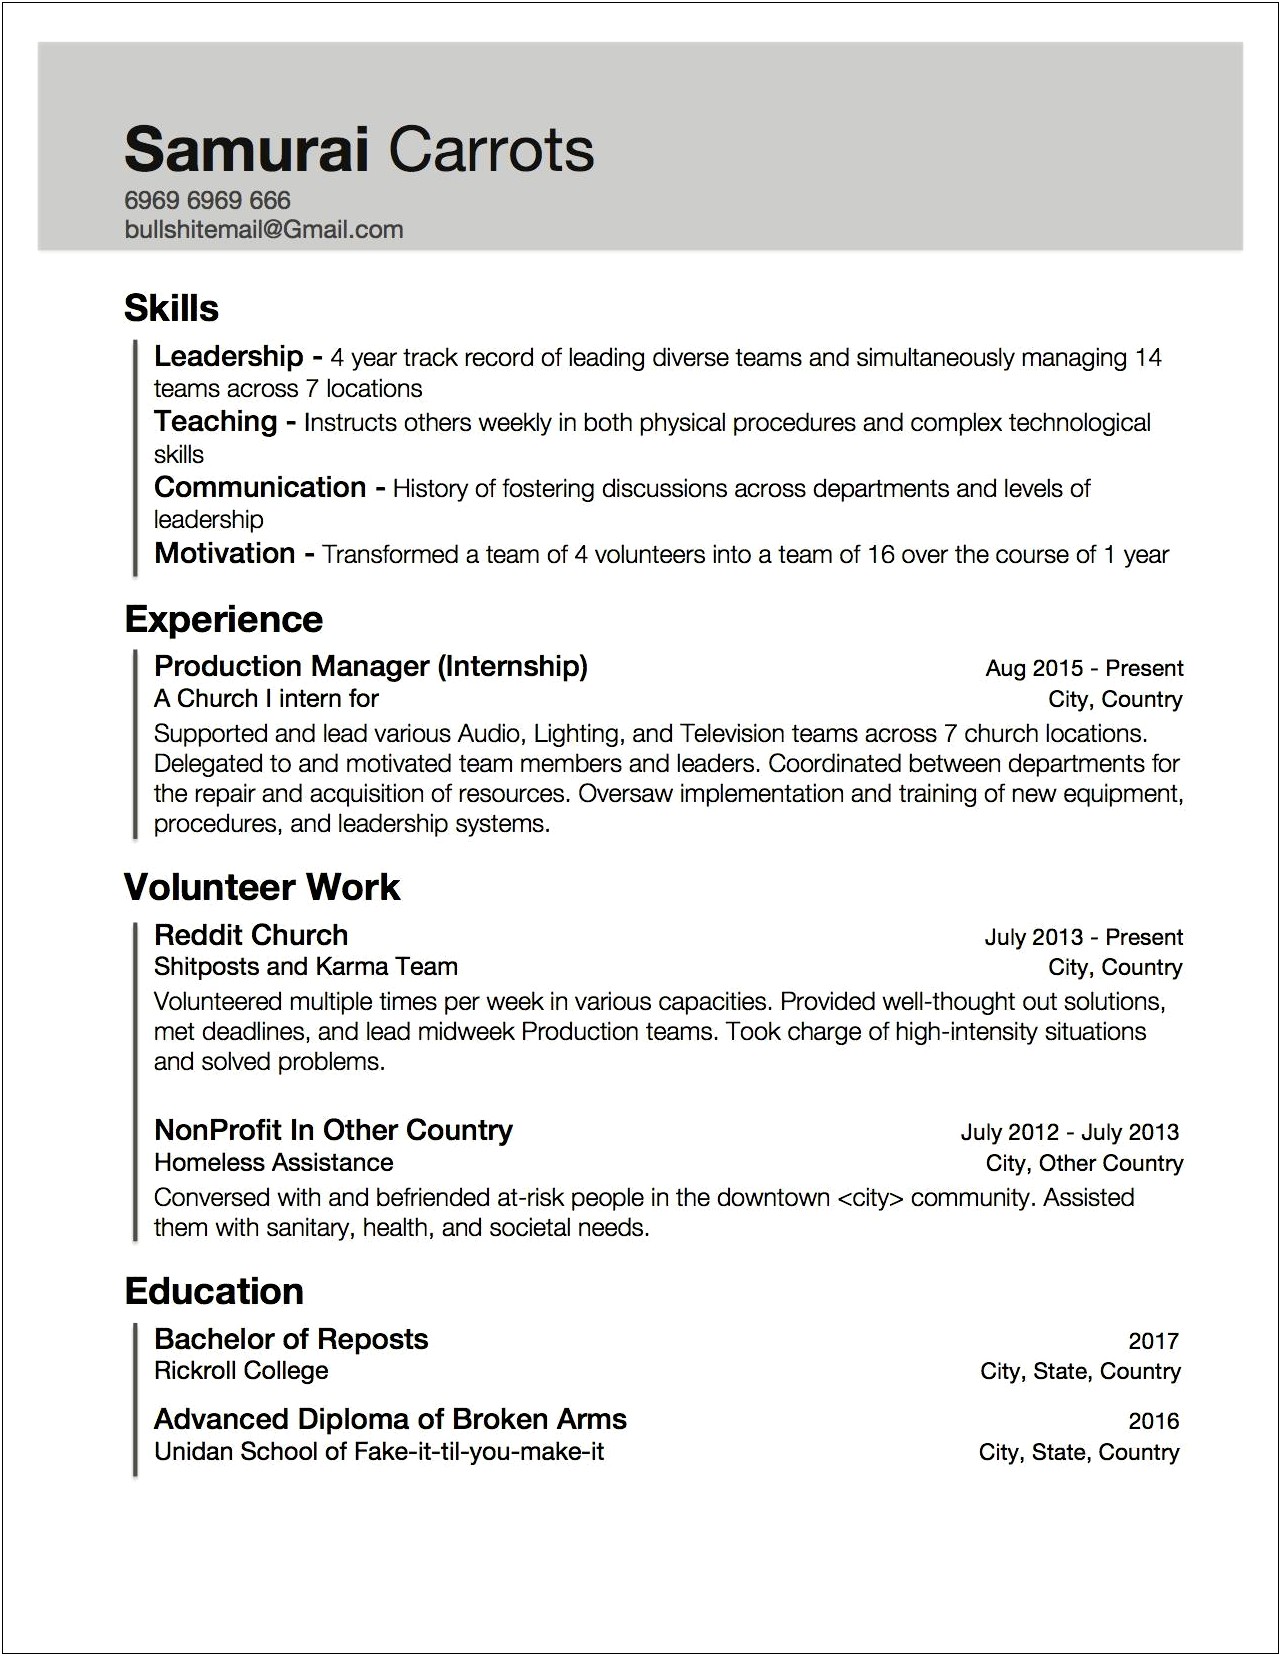 Resume For People With No Experience Reddit